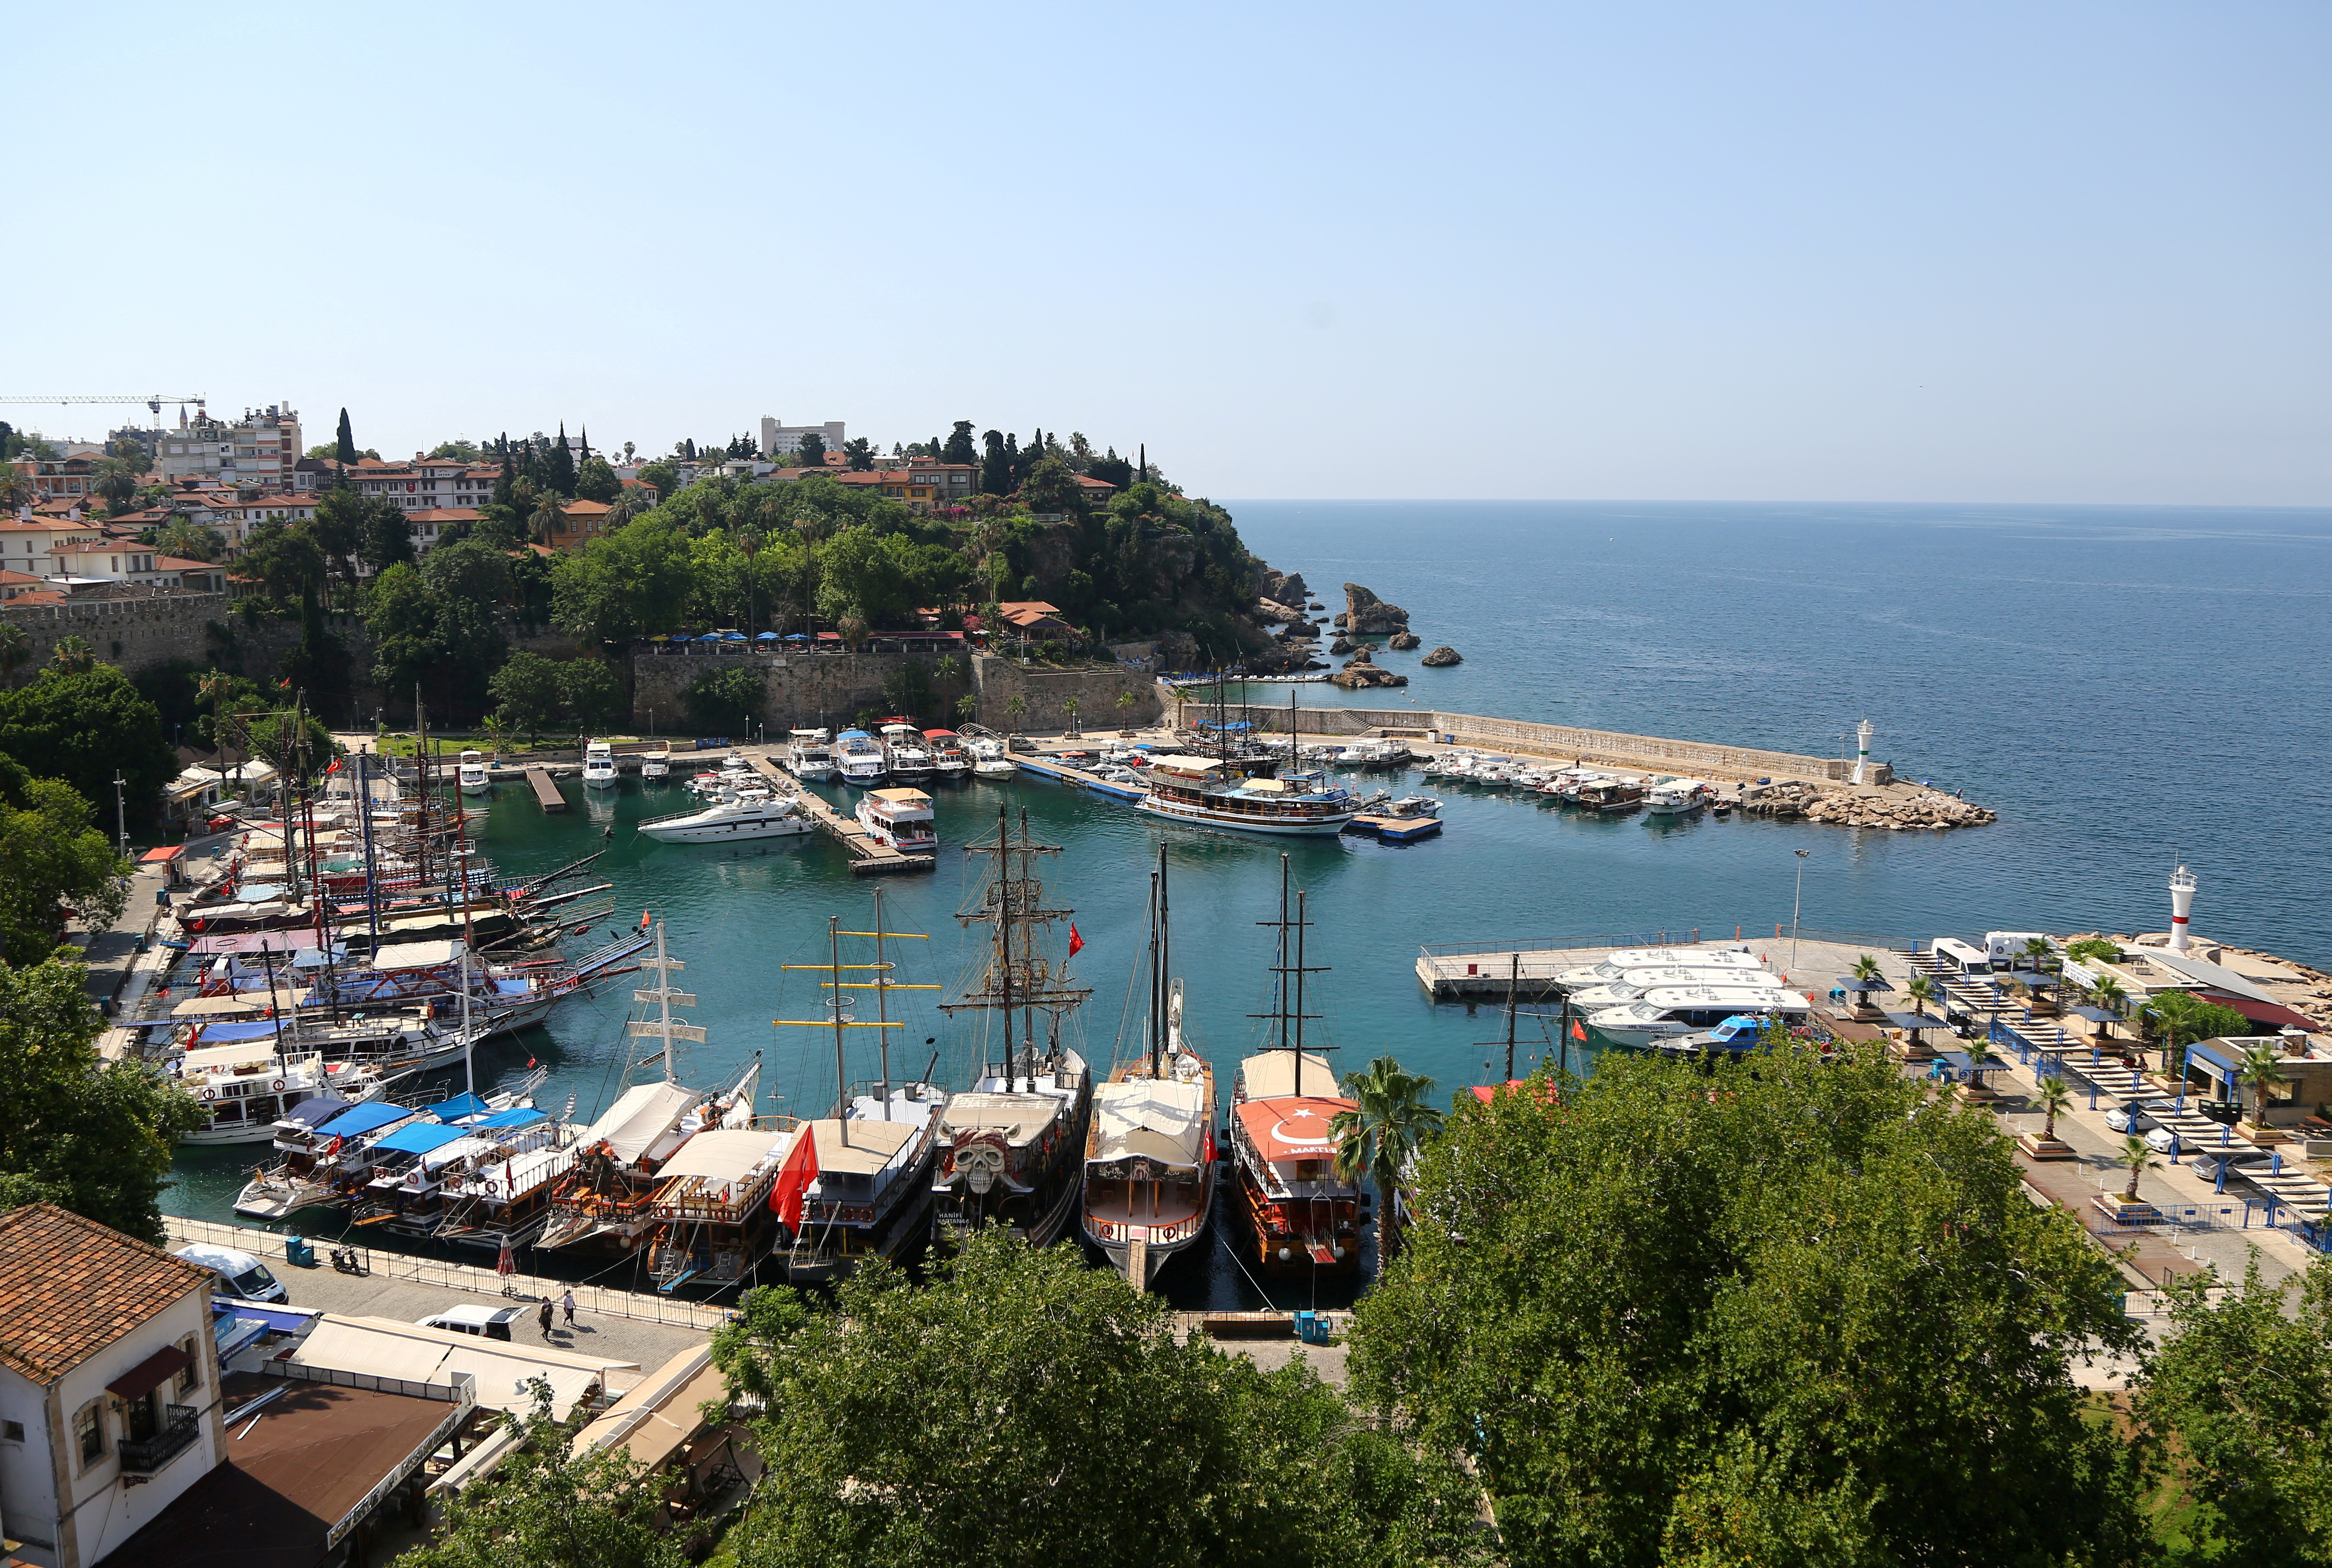 The old town and the historic port are seen in Antalya